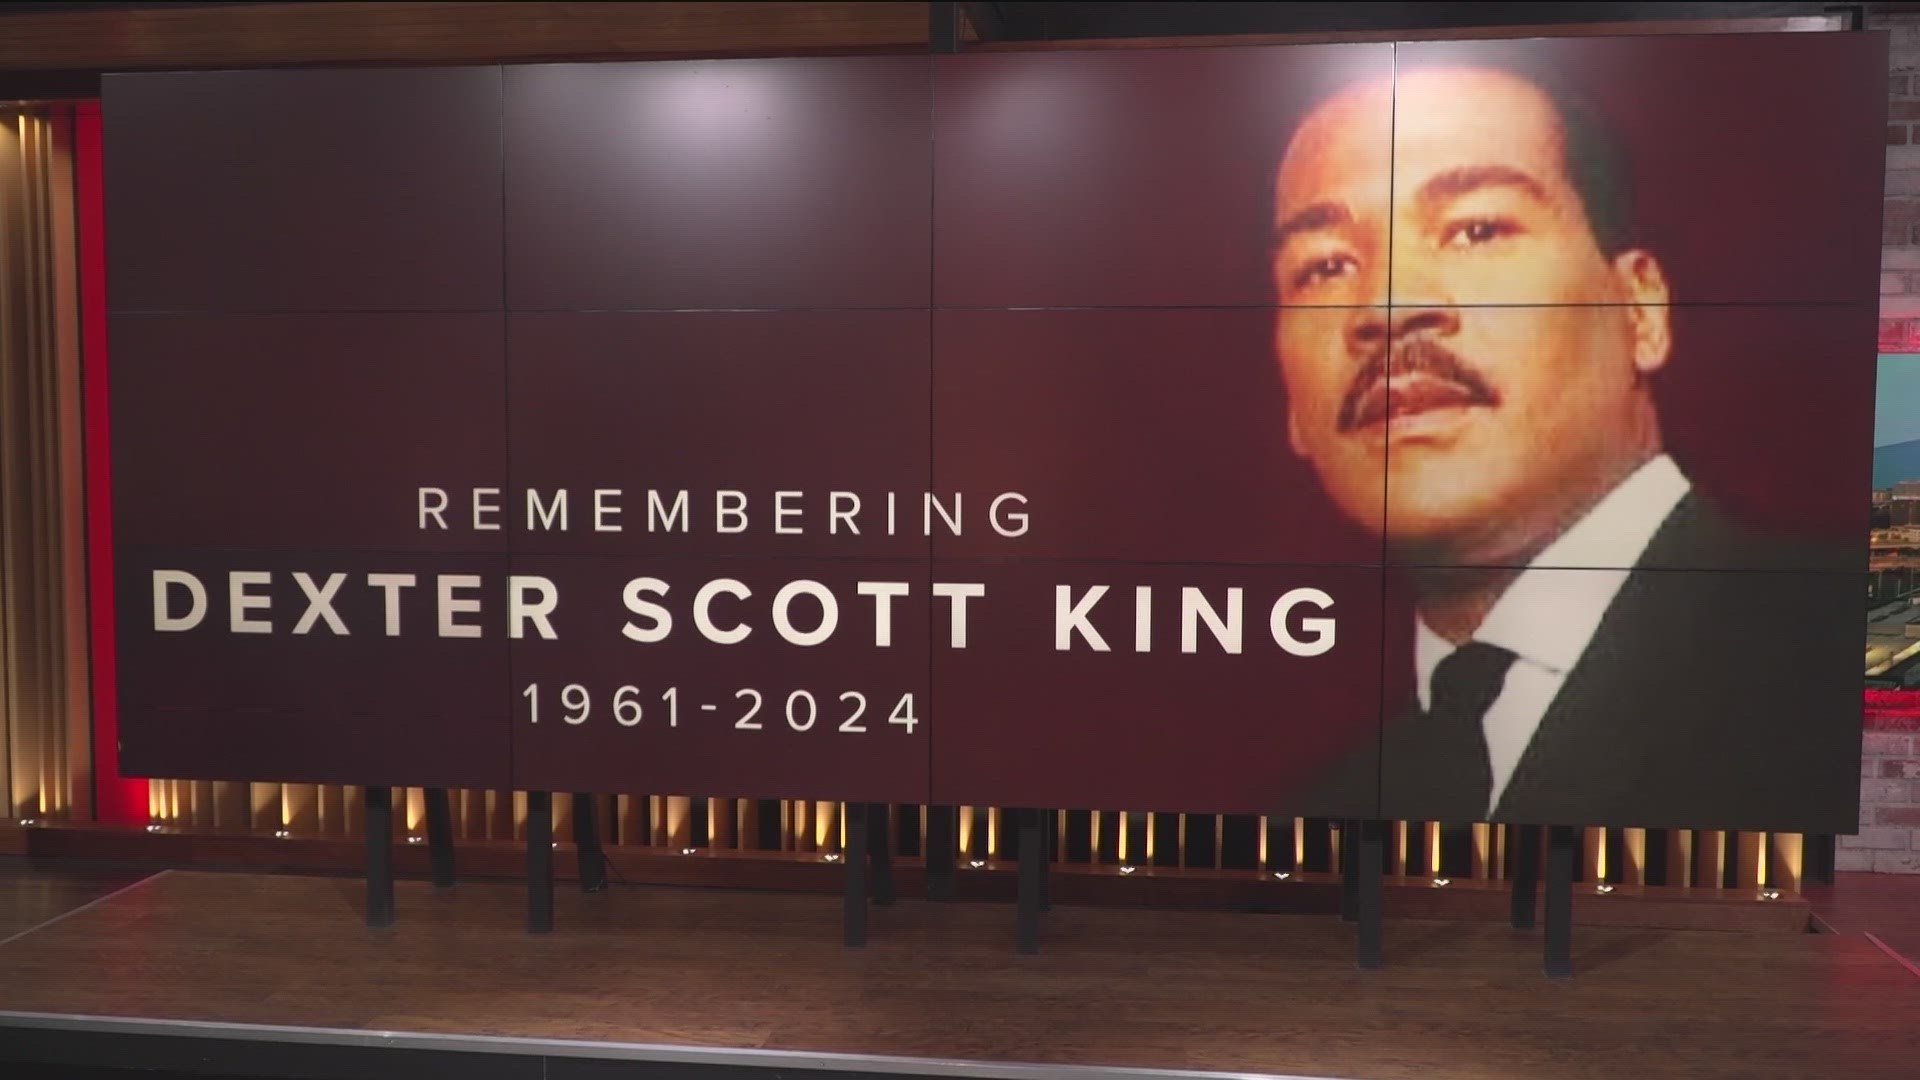 The 62-year-old died after a battle with prostate cancer, The King Center announced Monday.